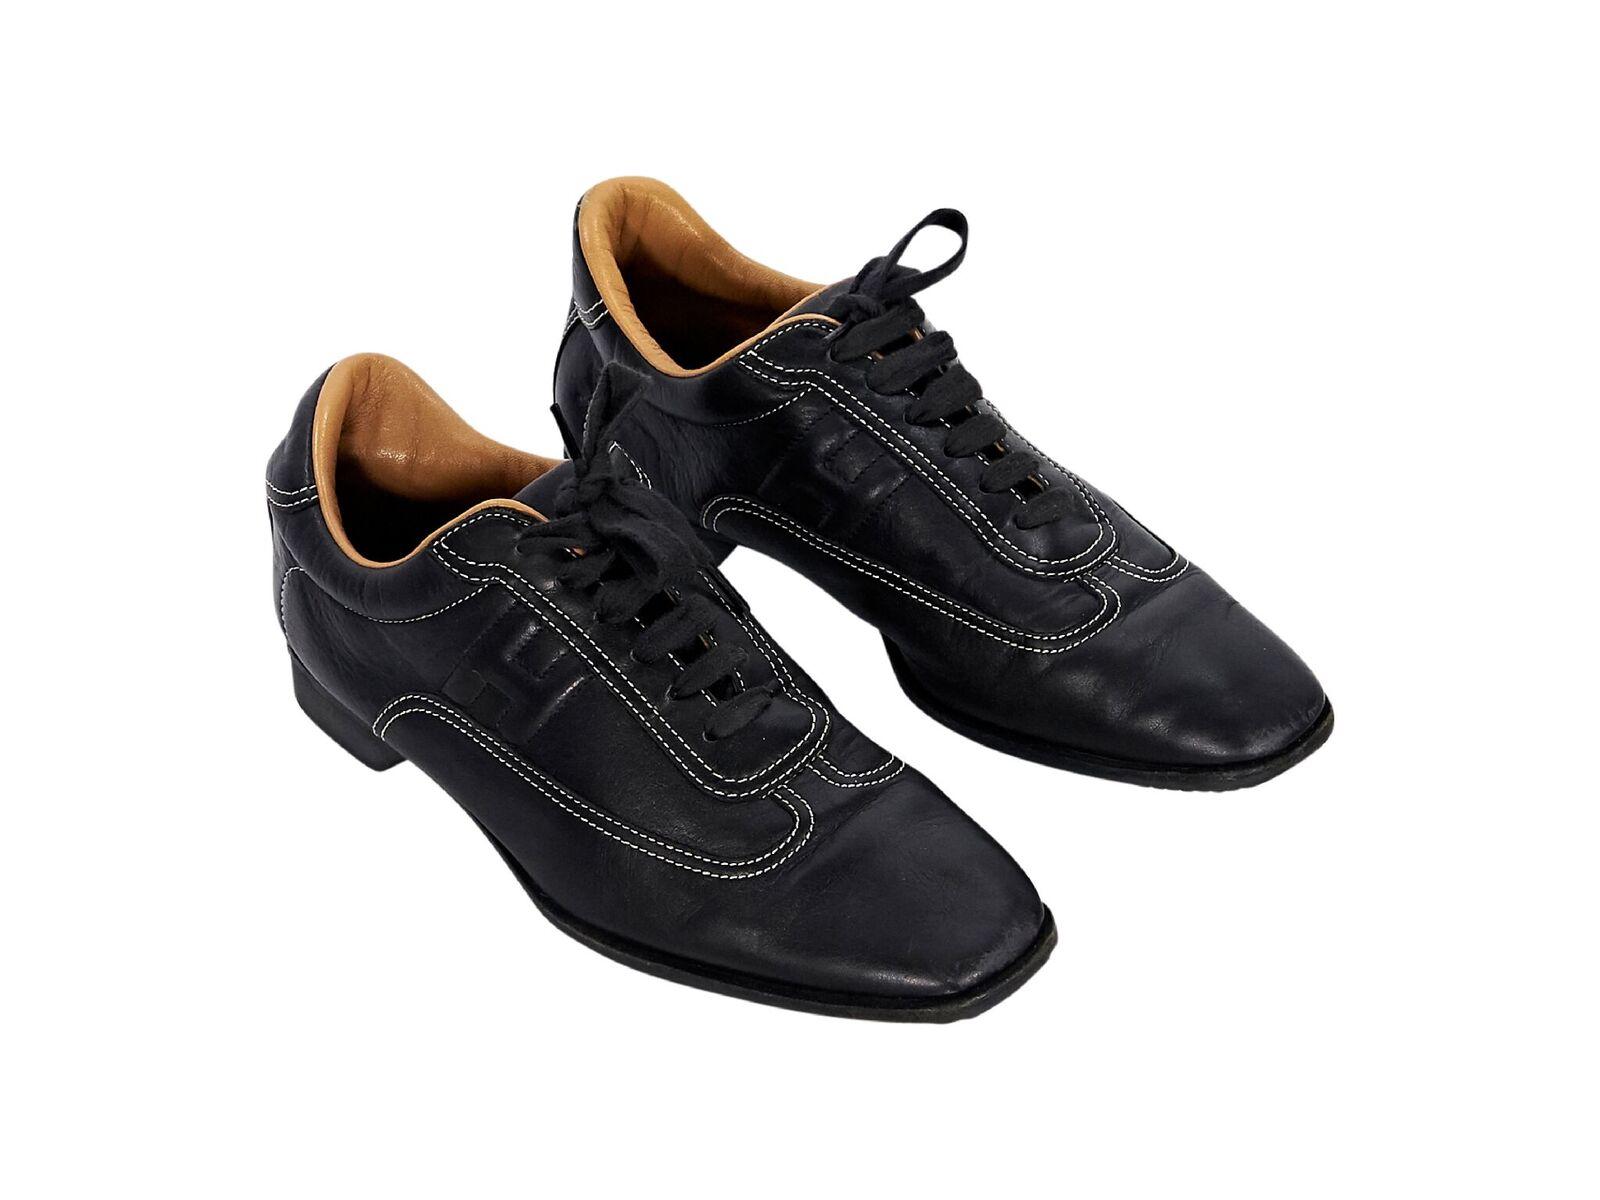 Product details:  Black leather sneakers by Hermes.  Accented with white topstitching.  Lace-up closure.  Square toe.  
Condition: Pre-owned. Very good.
Est. Retail $ 1,035.00
